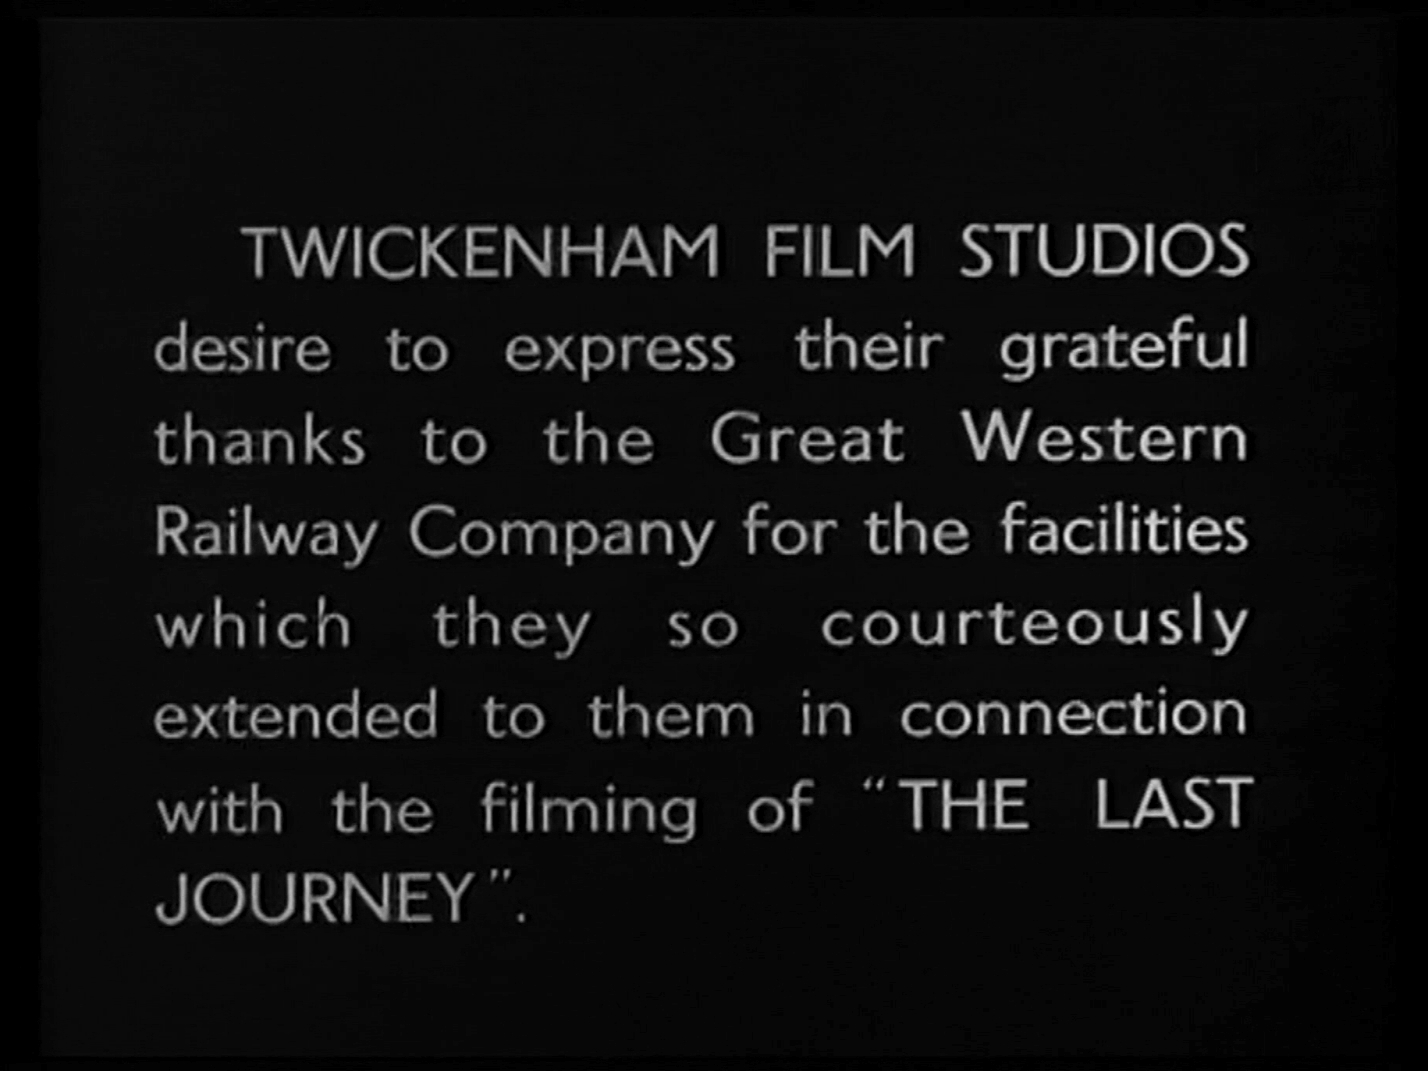 Main title from The Last Journey (1935) (1). Twickenham Film Studios desire to express their grateful thanks to the Great Western Railway Company for the facilities which they so courteously extended to them in connection with the filming of ‘The Last Journey’